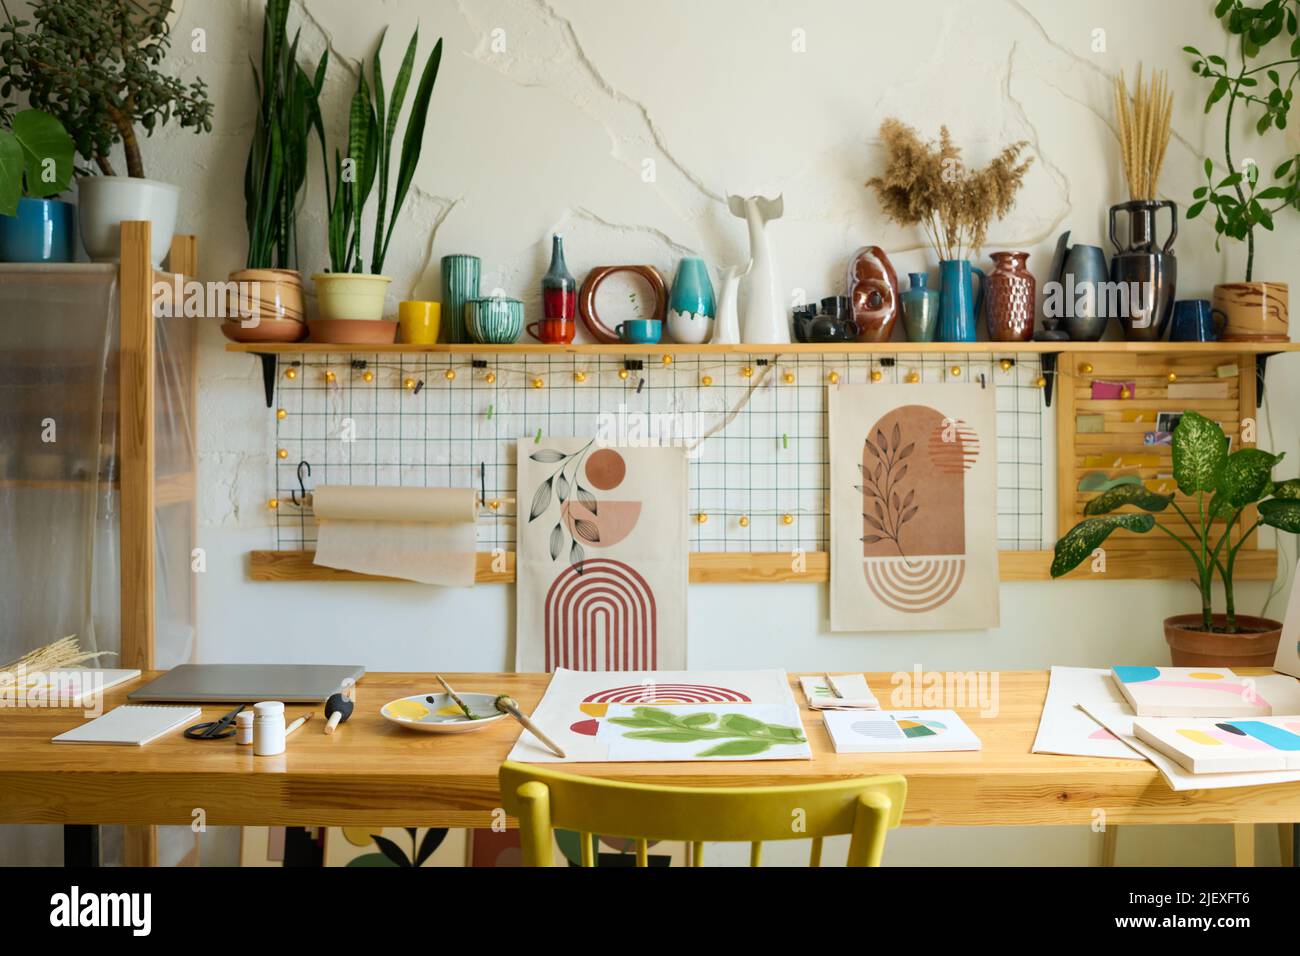 Interior of workshop of contemporary designer or studio of artist with supplies for painting on table and handmade items on shelf along wall Stock Photo